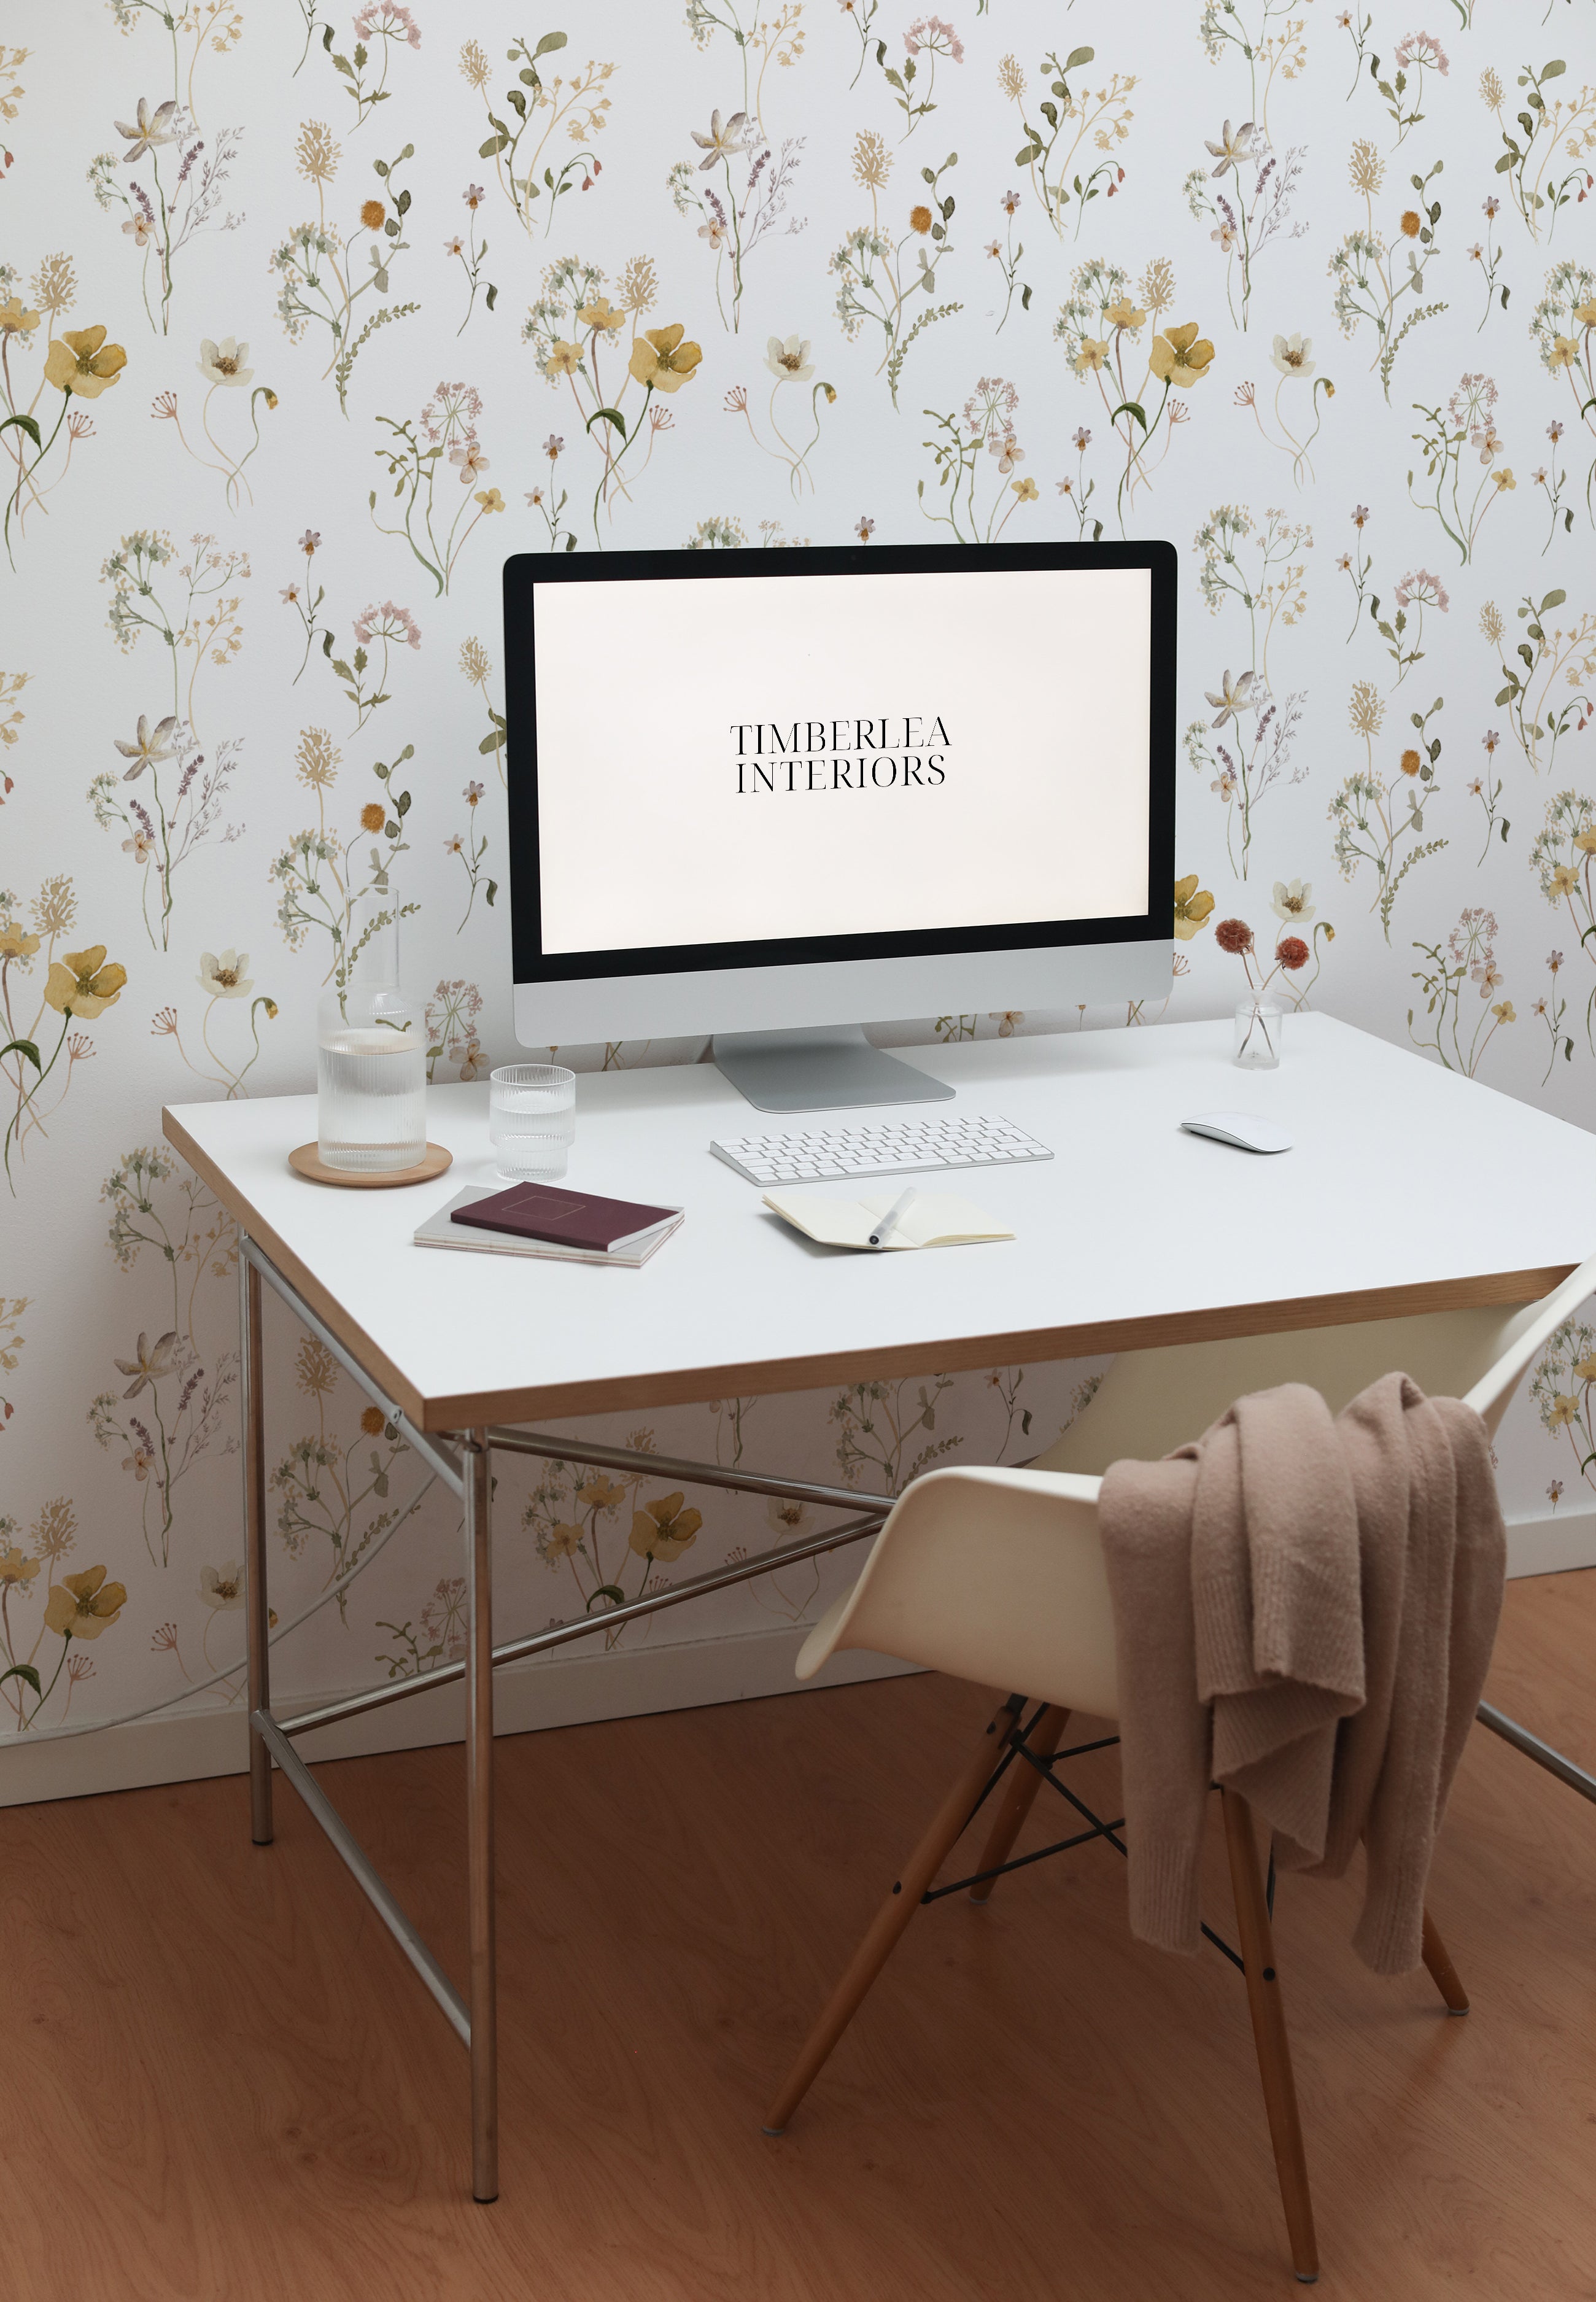 A modern home office brightened by the Delicate Floral Wallpaper, offering a calming floral pattern that creates a serene workspace.